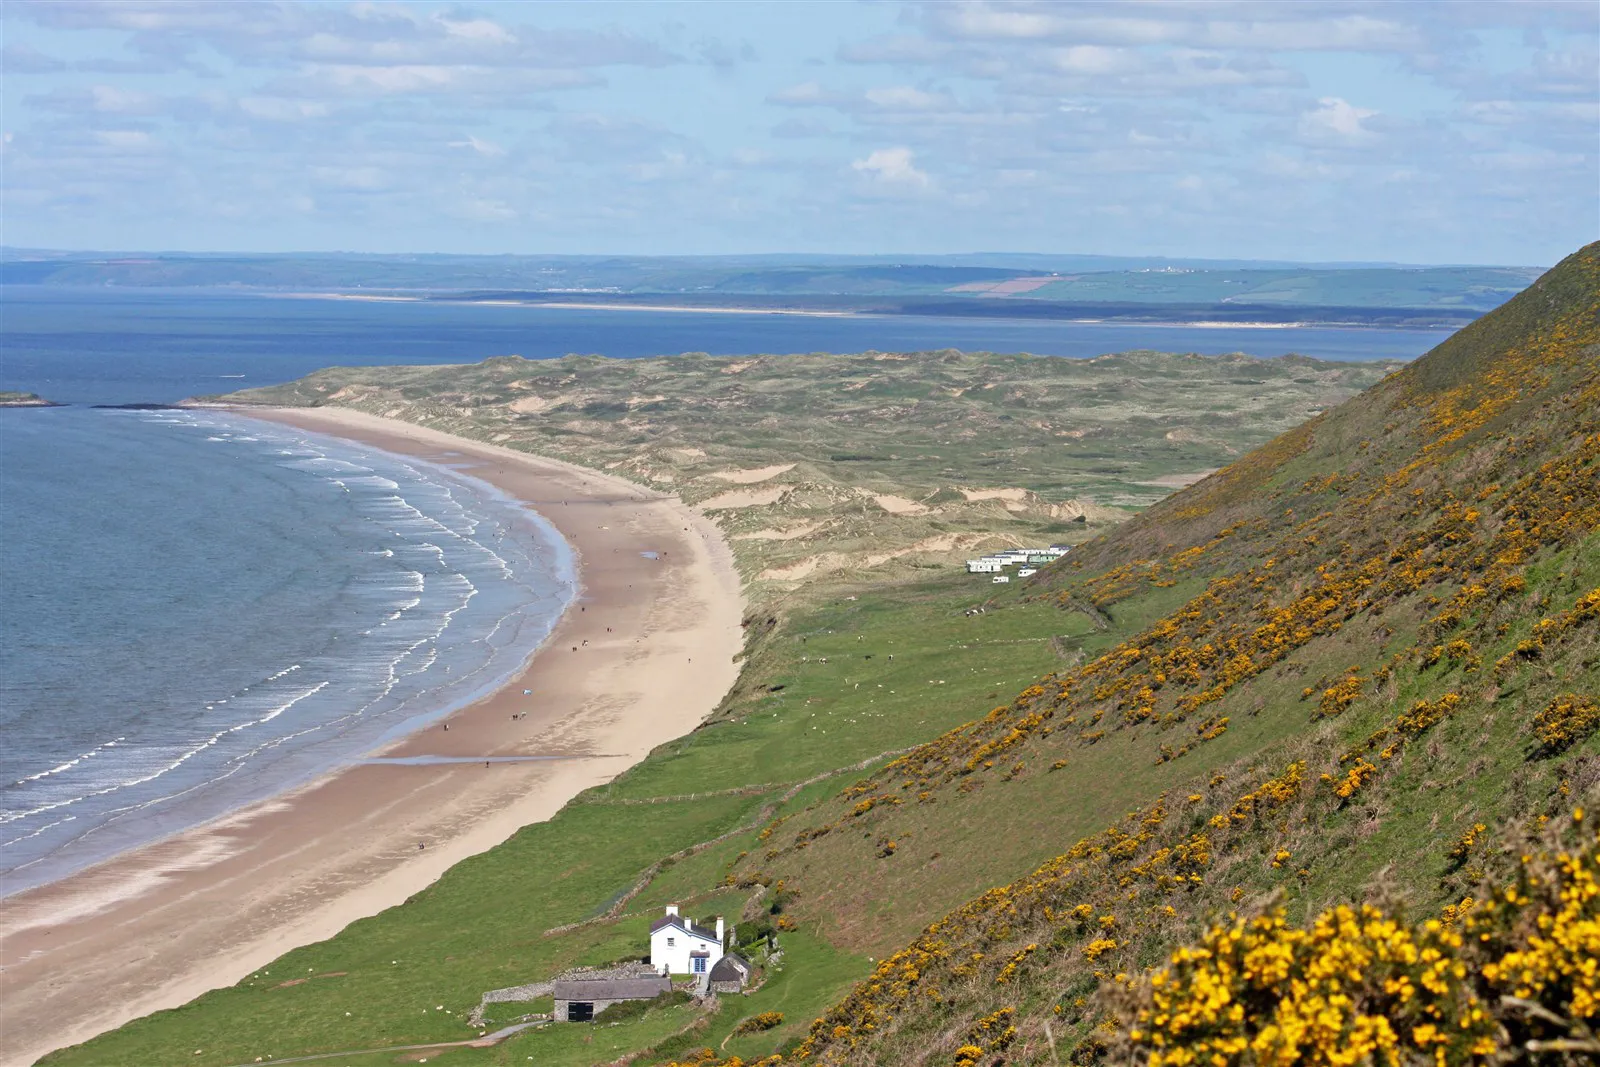 Gower Peninsula in southern Wales